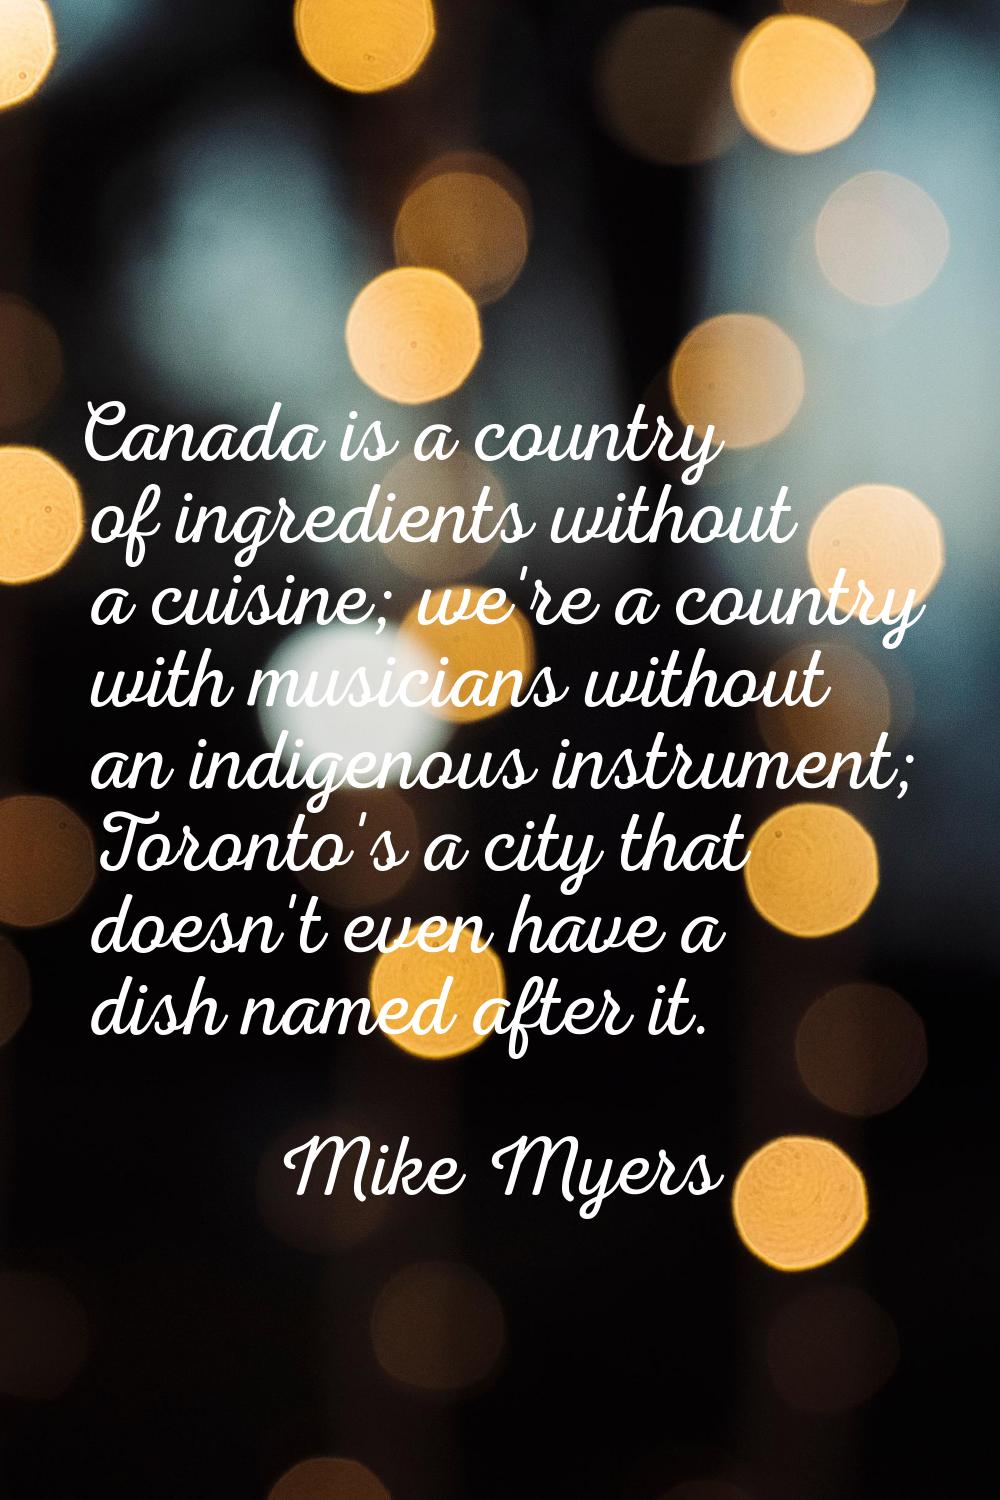 Canada is a country of ingredients without a cuisine; we're a country with musicians without an ind